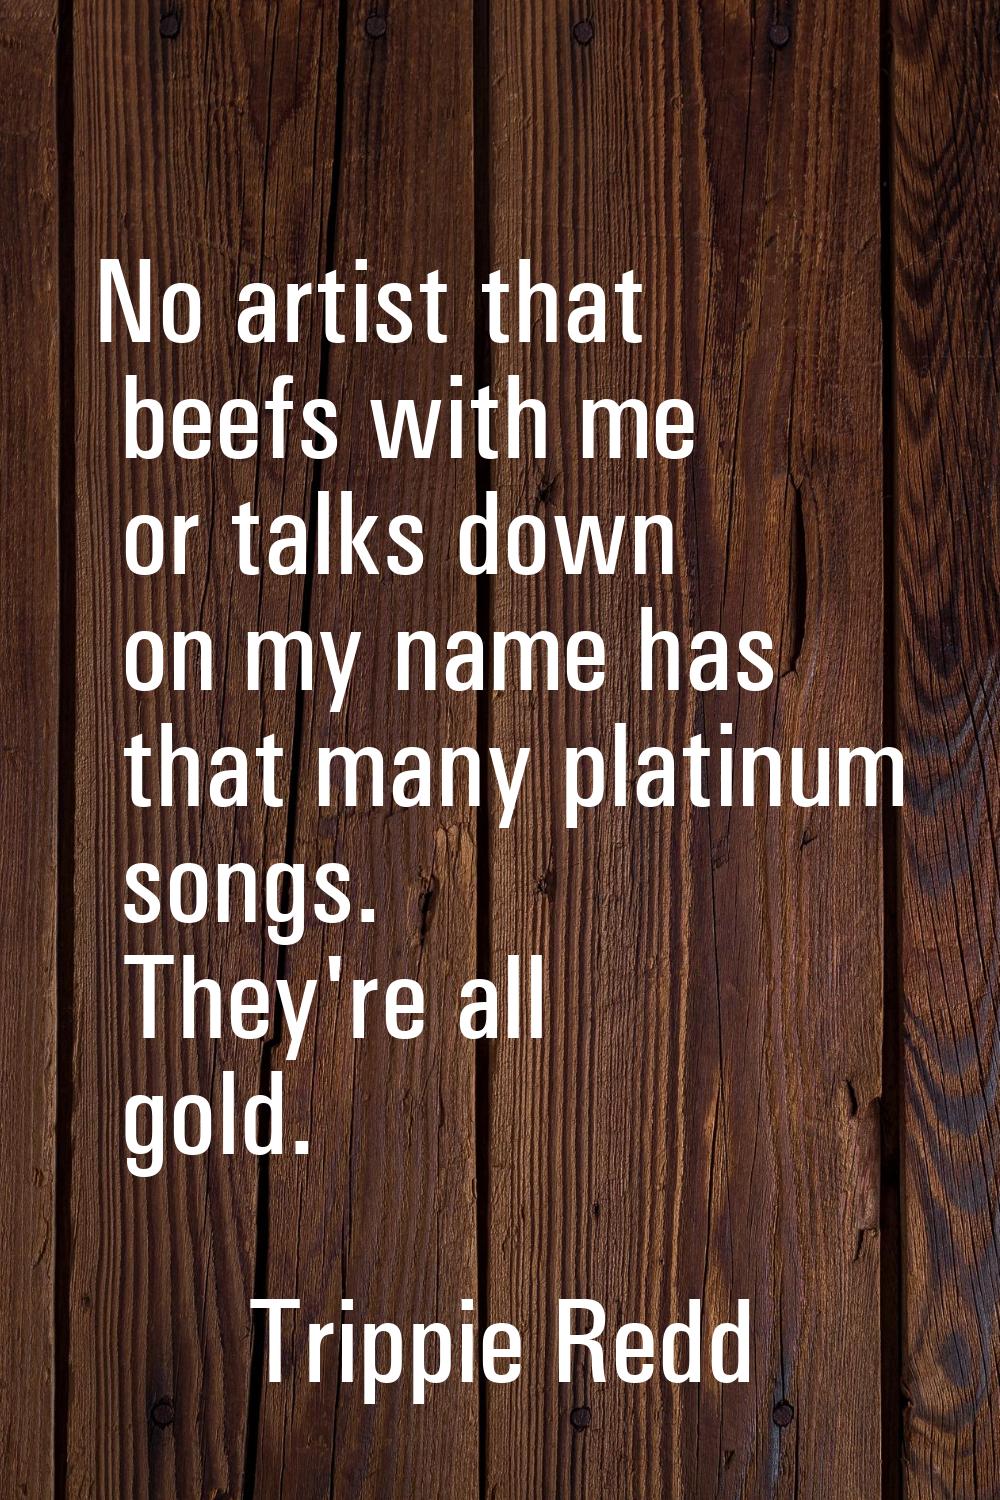 No artist that beefs with me or talks down on my name has that many platinum songs. They're all gol